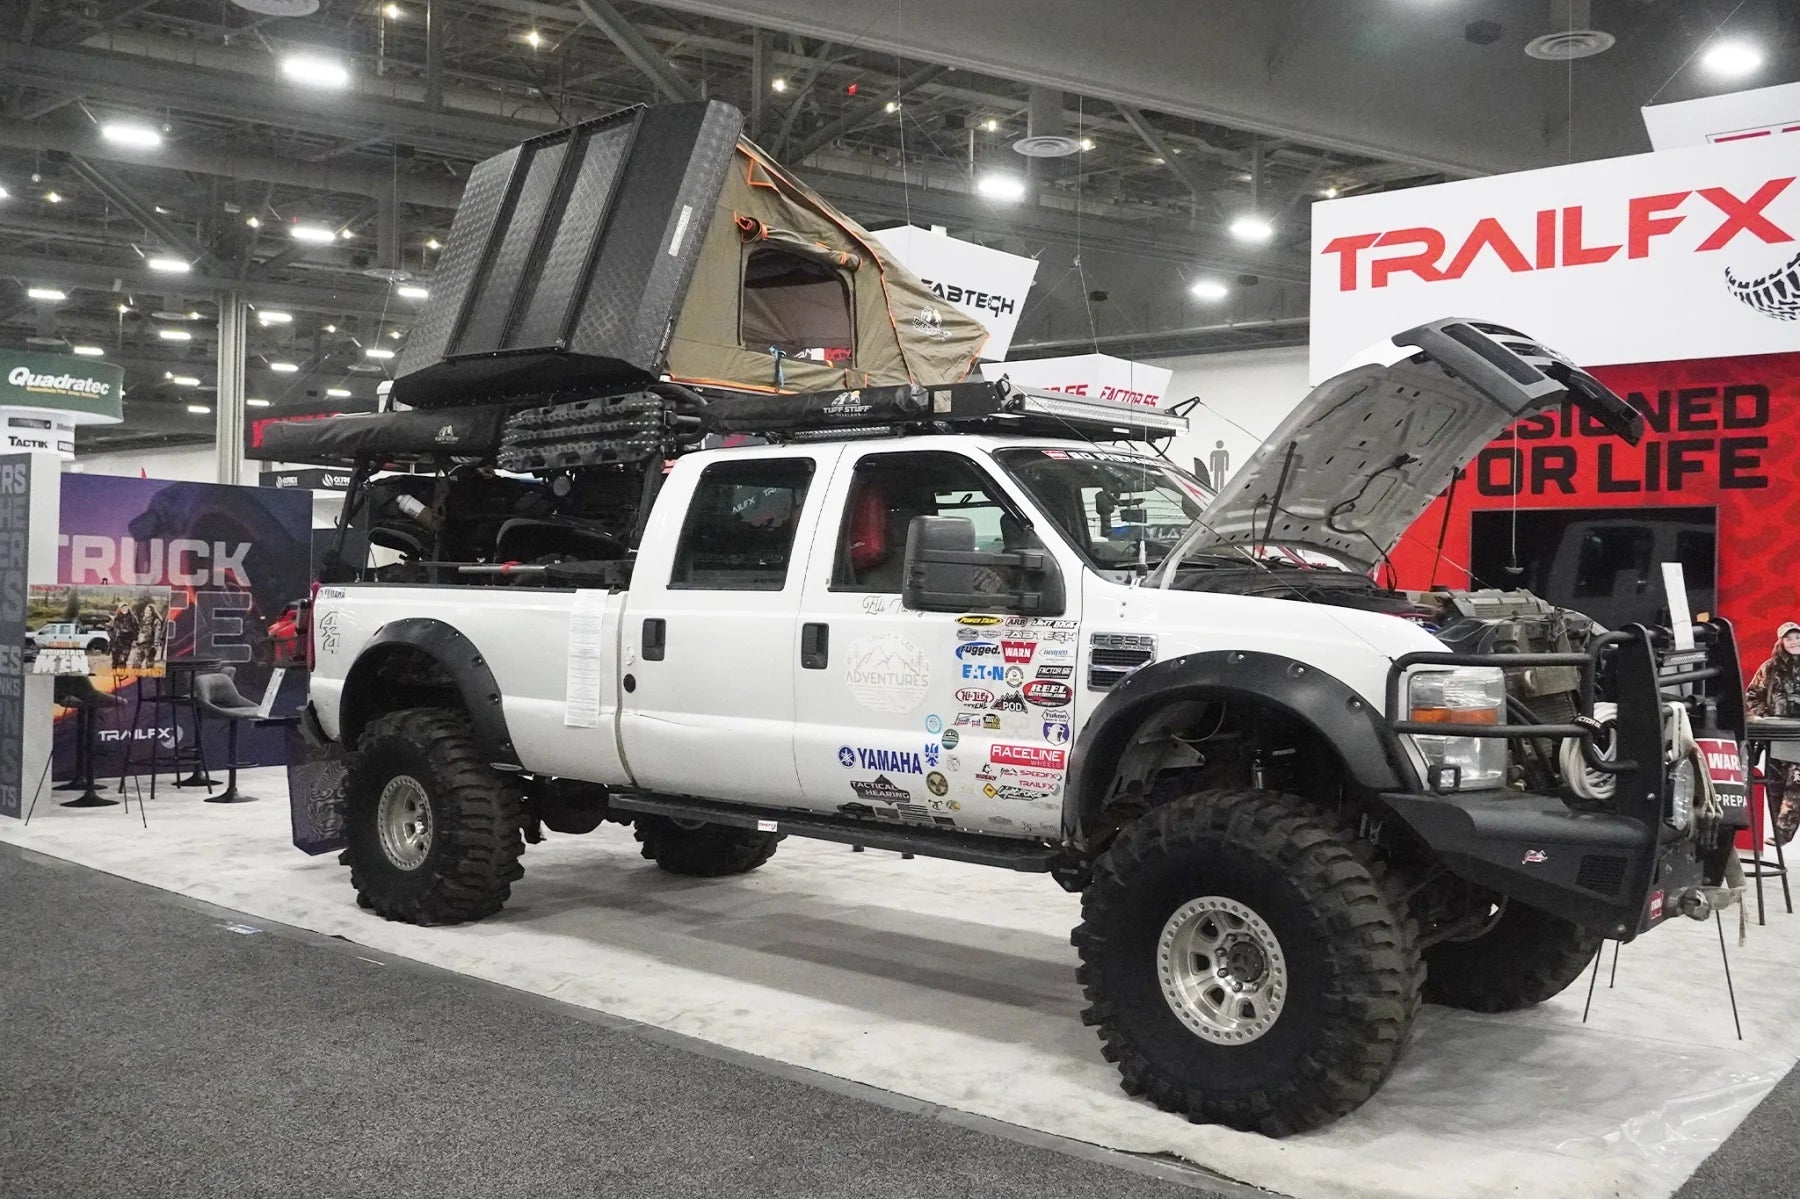 As seen on Men's Journal - Coolest Overlanding Rigs We Saw at SEMA 2022 - Tuff Stuff Overland